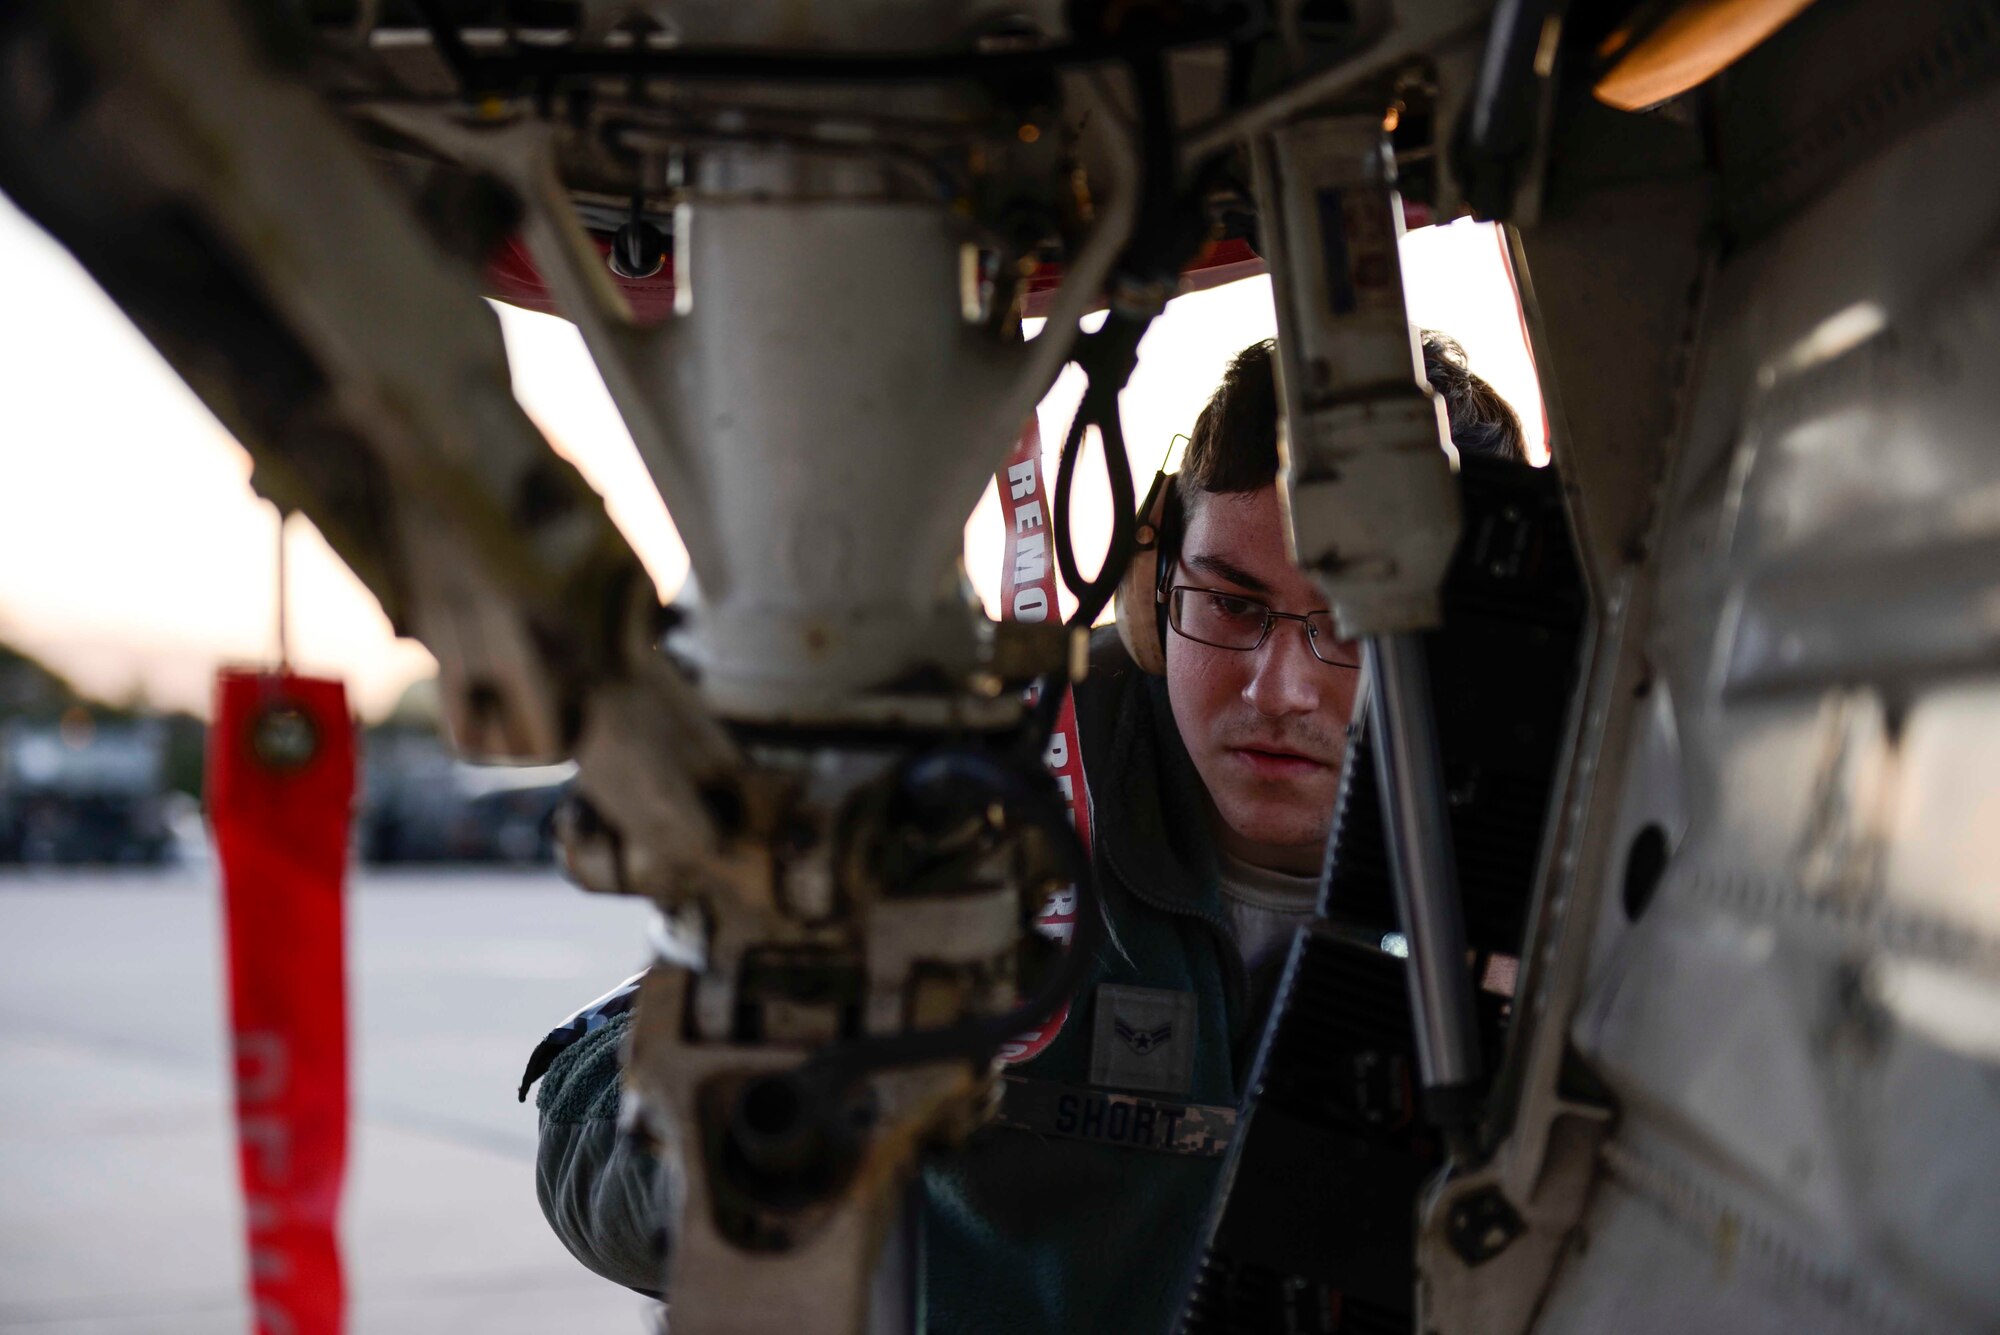 Airman 1st Class Samuel Short, a crew chief assigned to the 480th Expeditionary Fighter Squadron, inspects the front wheel assembly of an F-16 Fighter Falcon during a flying training deployment on the flightline at Souda Bay, Greece, Jan. 27, 2016. Approximately 300 personnel and 18 F-16s from the 52nd Fighter Wing at Spangdahlem Air Base, Germany, supported flight during the FTD as part of U.S. Air Forces in Europe-Air Forces Africa's Forward Ready Now stance. (U.S. Air Force photo/Staff Sgt. Christopher Ruano)